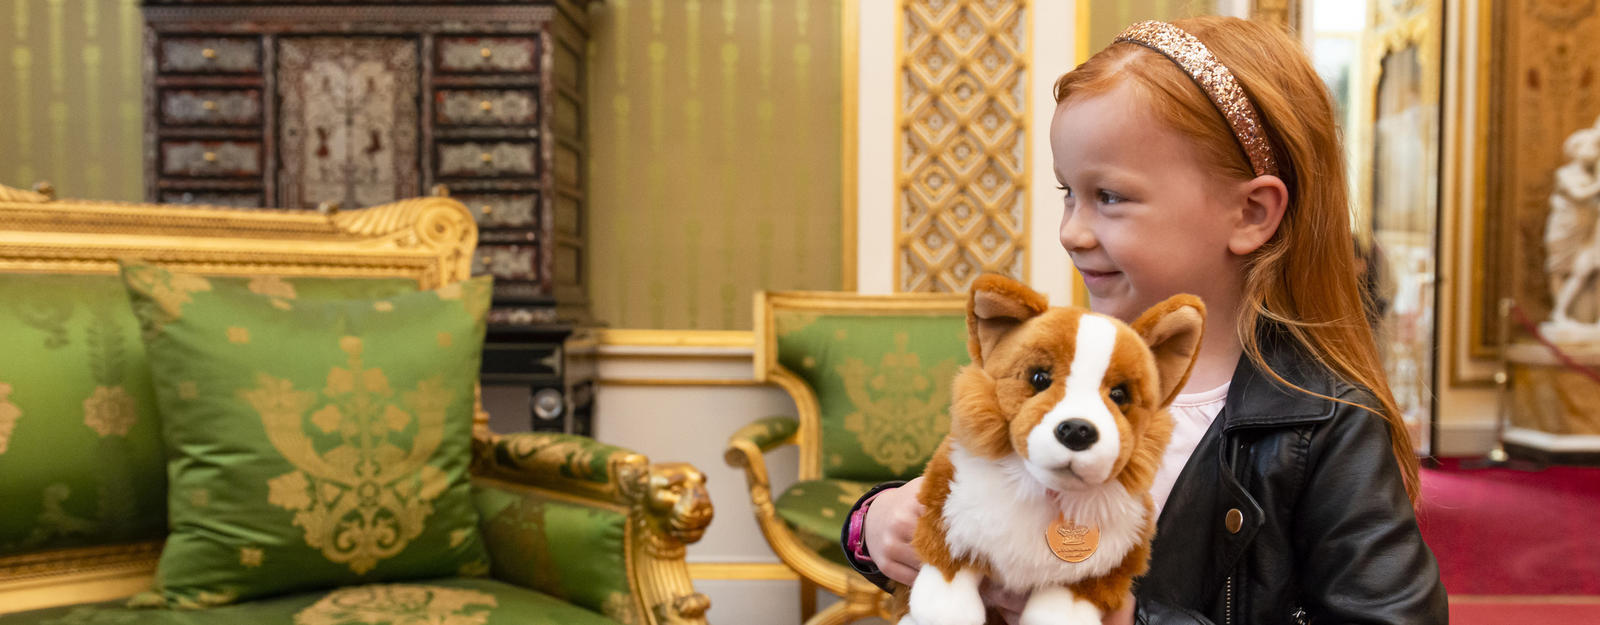 A family guided tour at Buckingham Palace